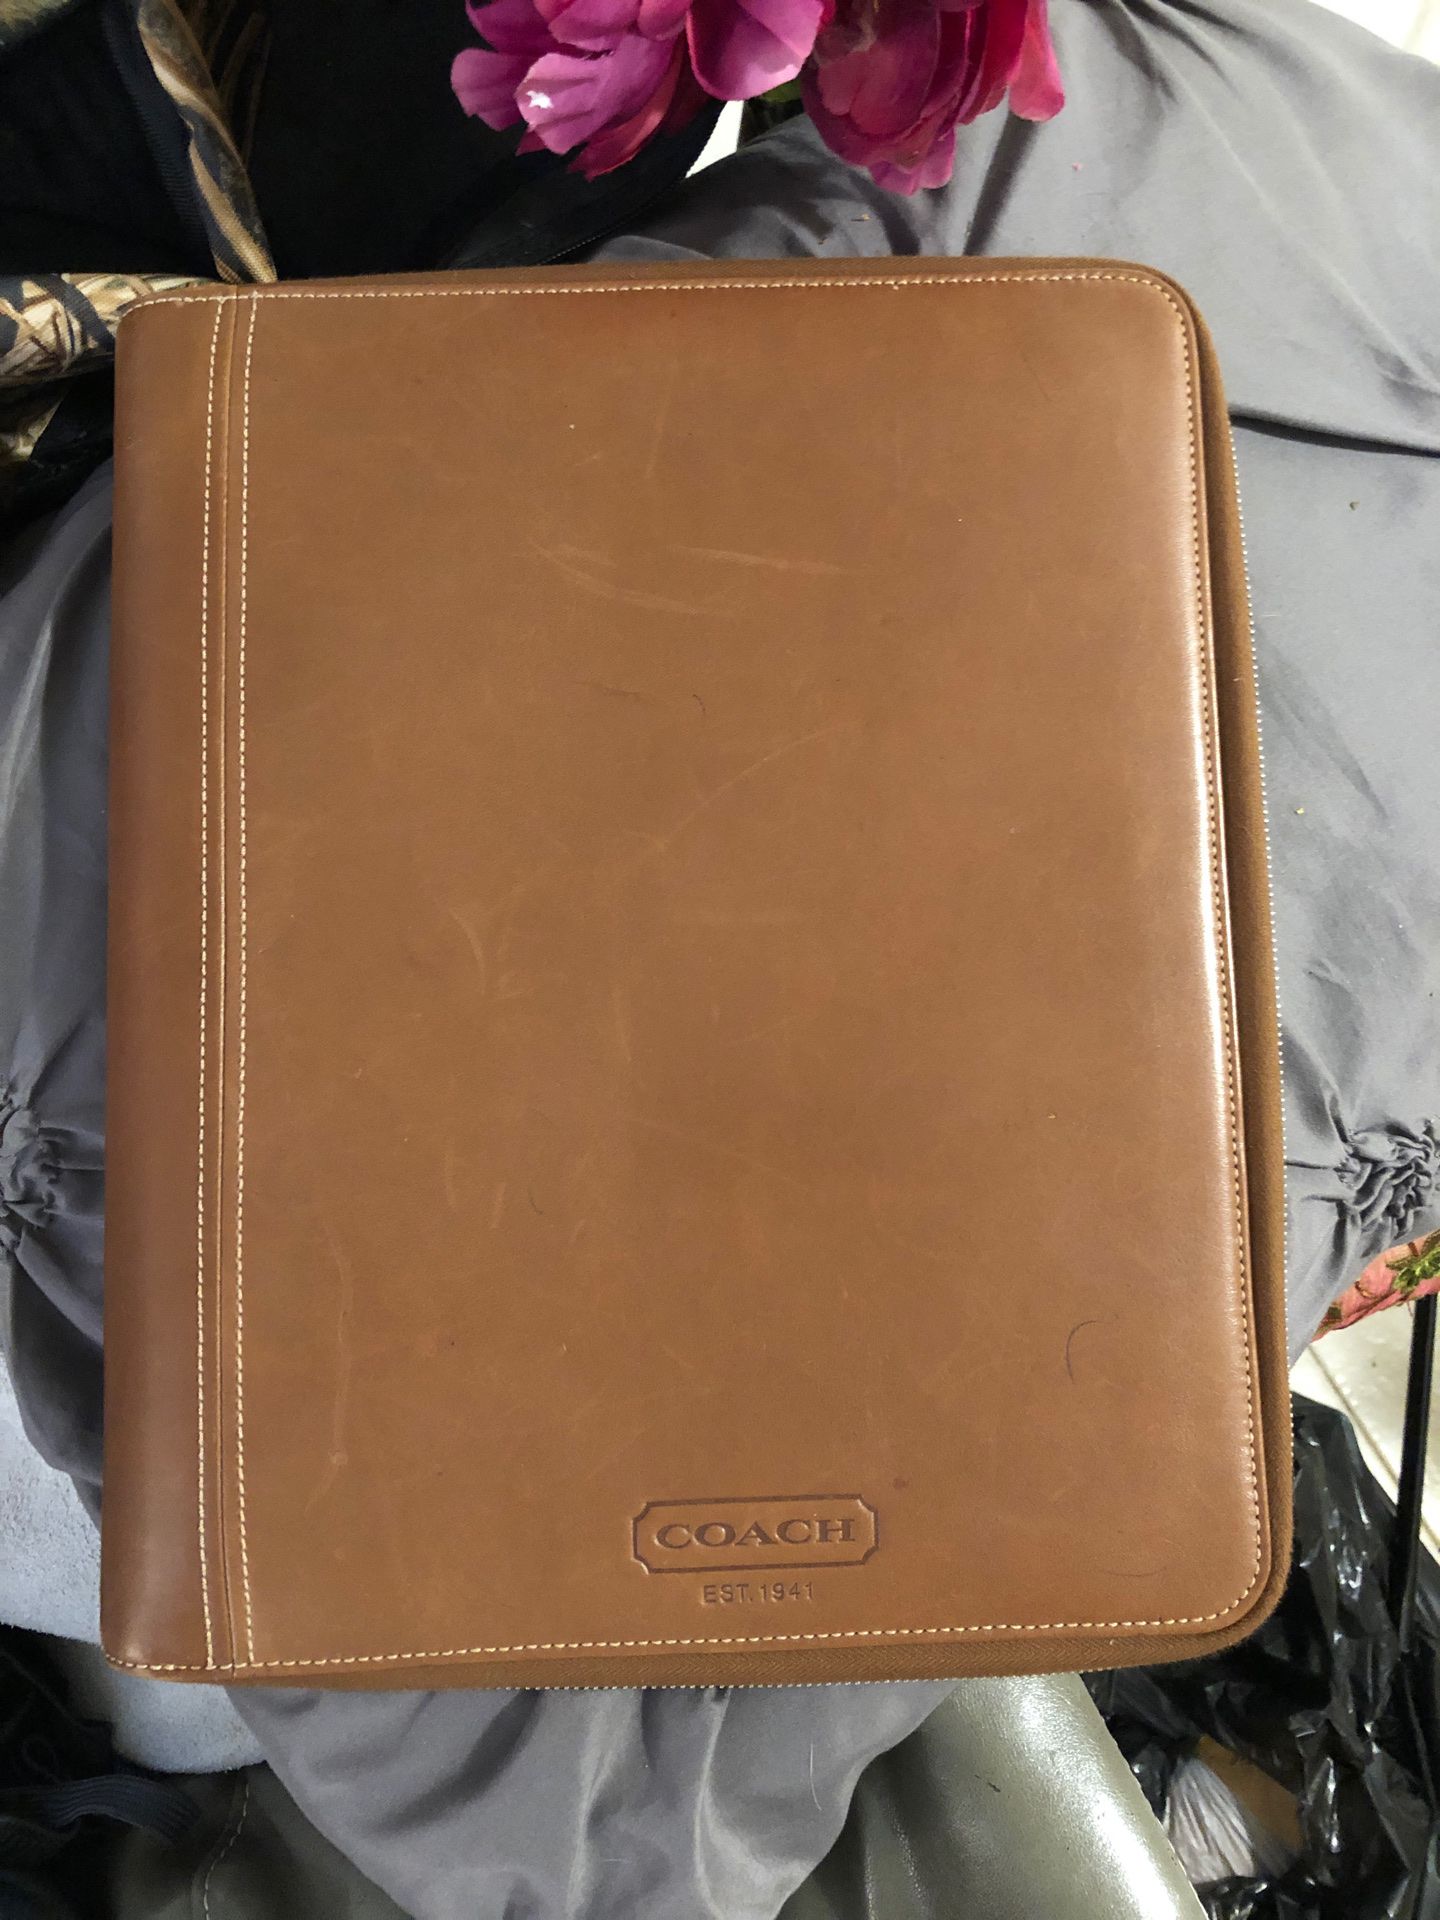 Coach leather Business binder